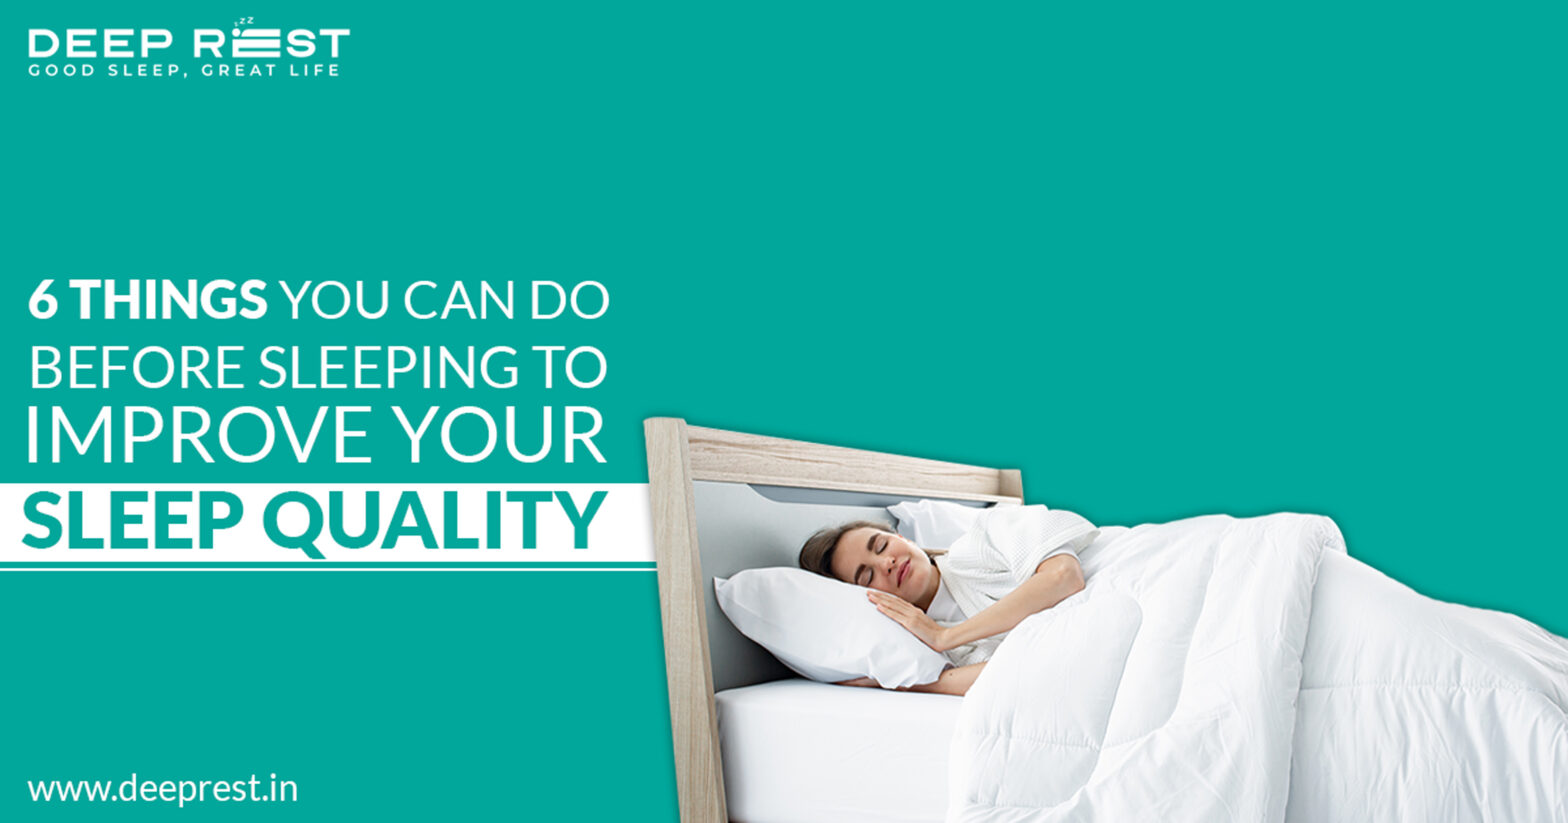 Improve Your Sleep Quality with soft pillow and mattress